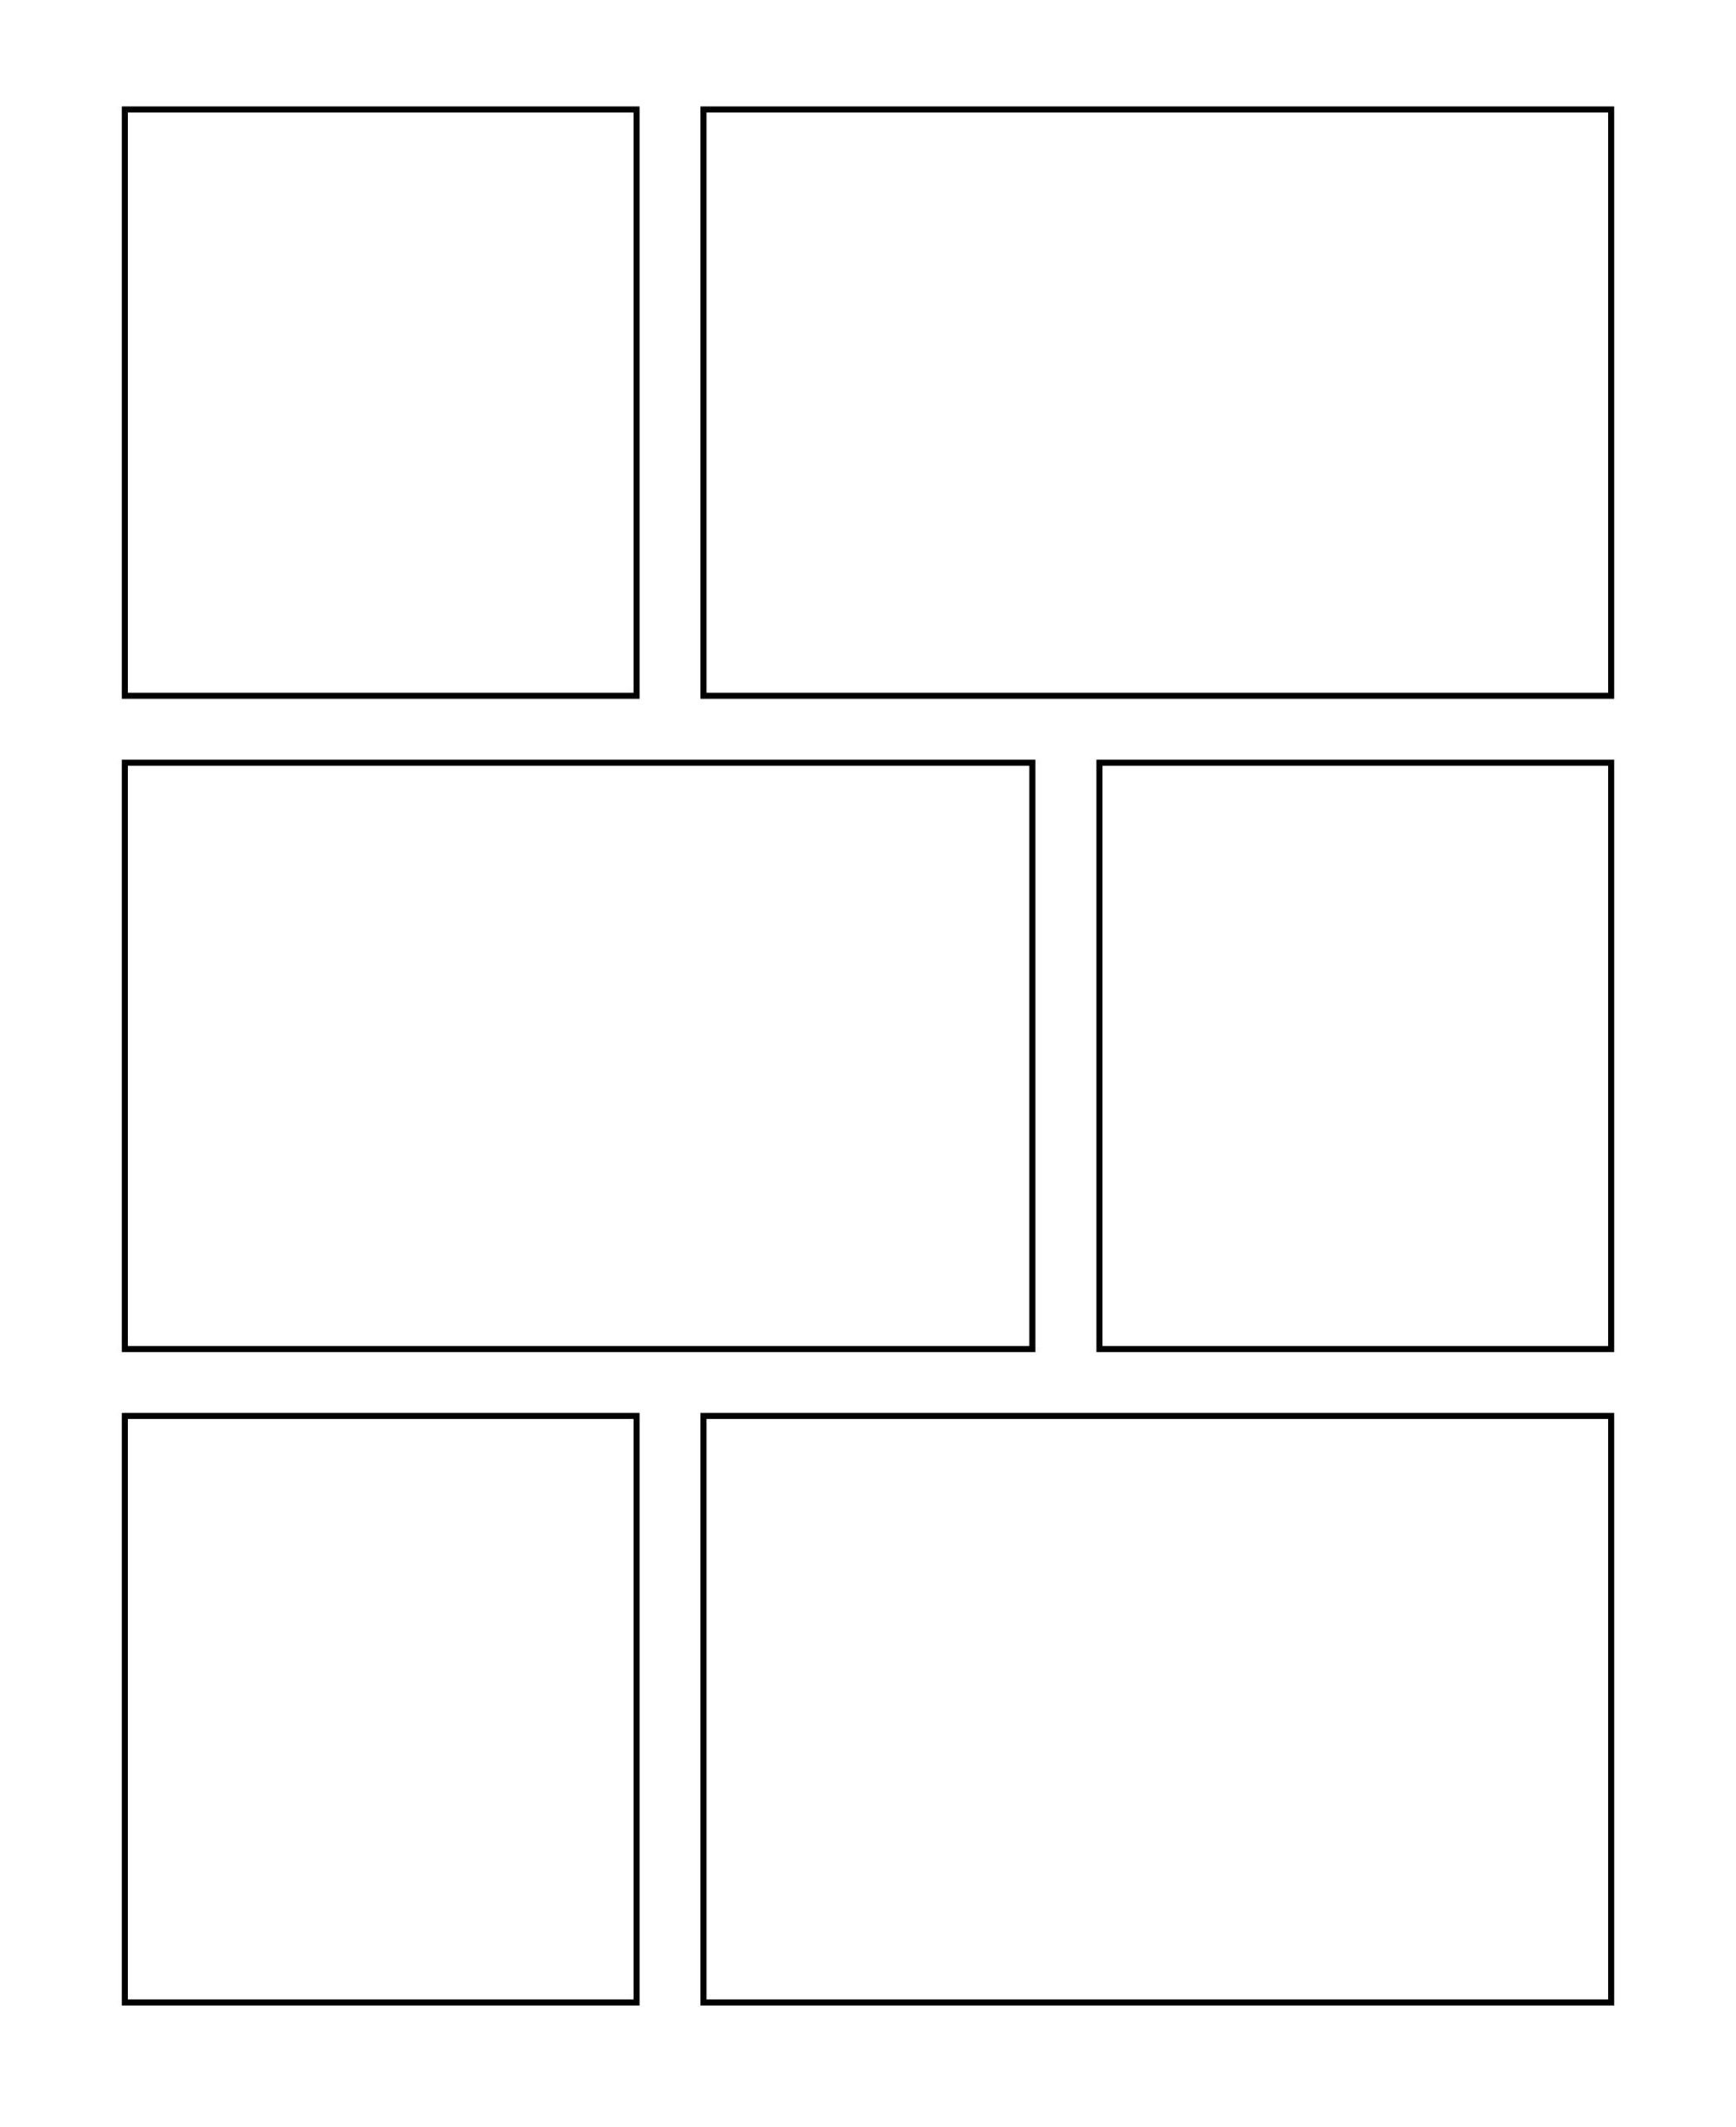 Comic Template | Comic Template | Comic Template, Comics within Printable Blank Comic Strip Template For Kids